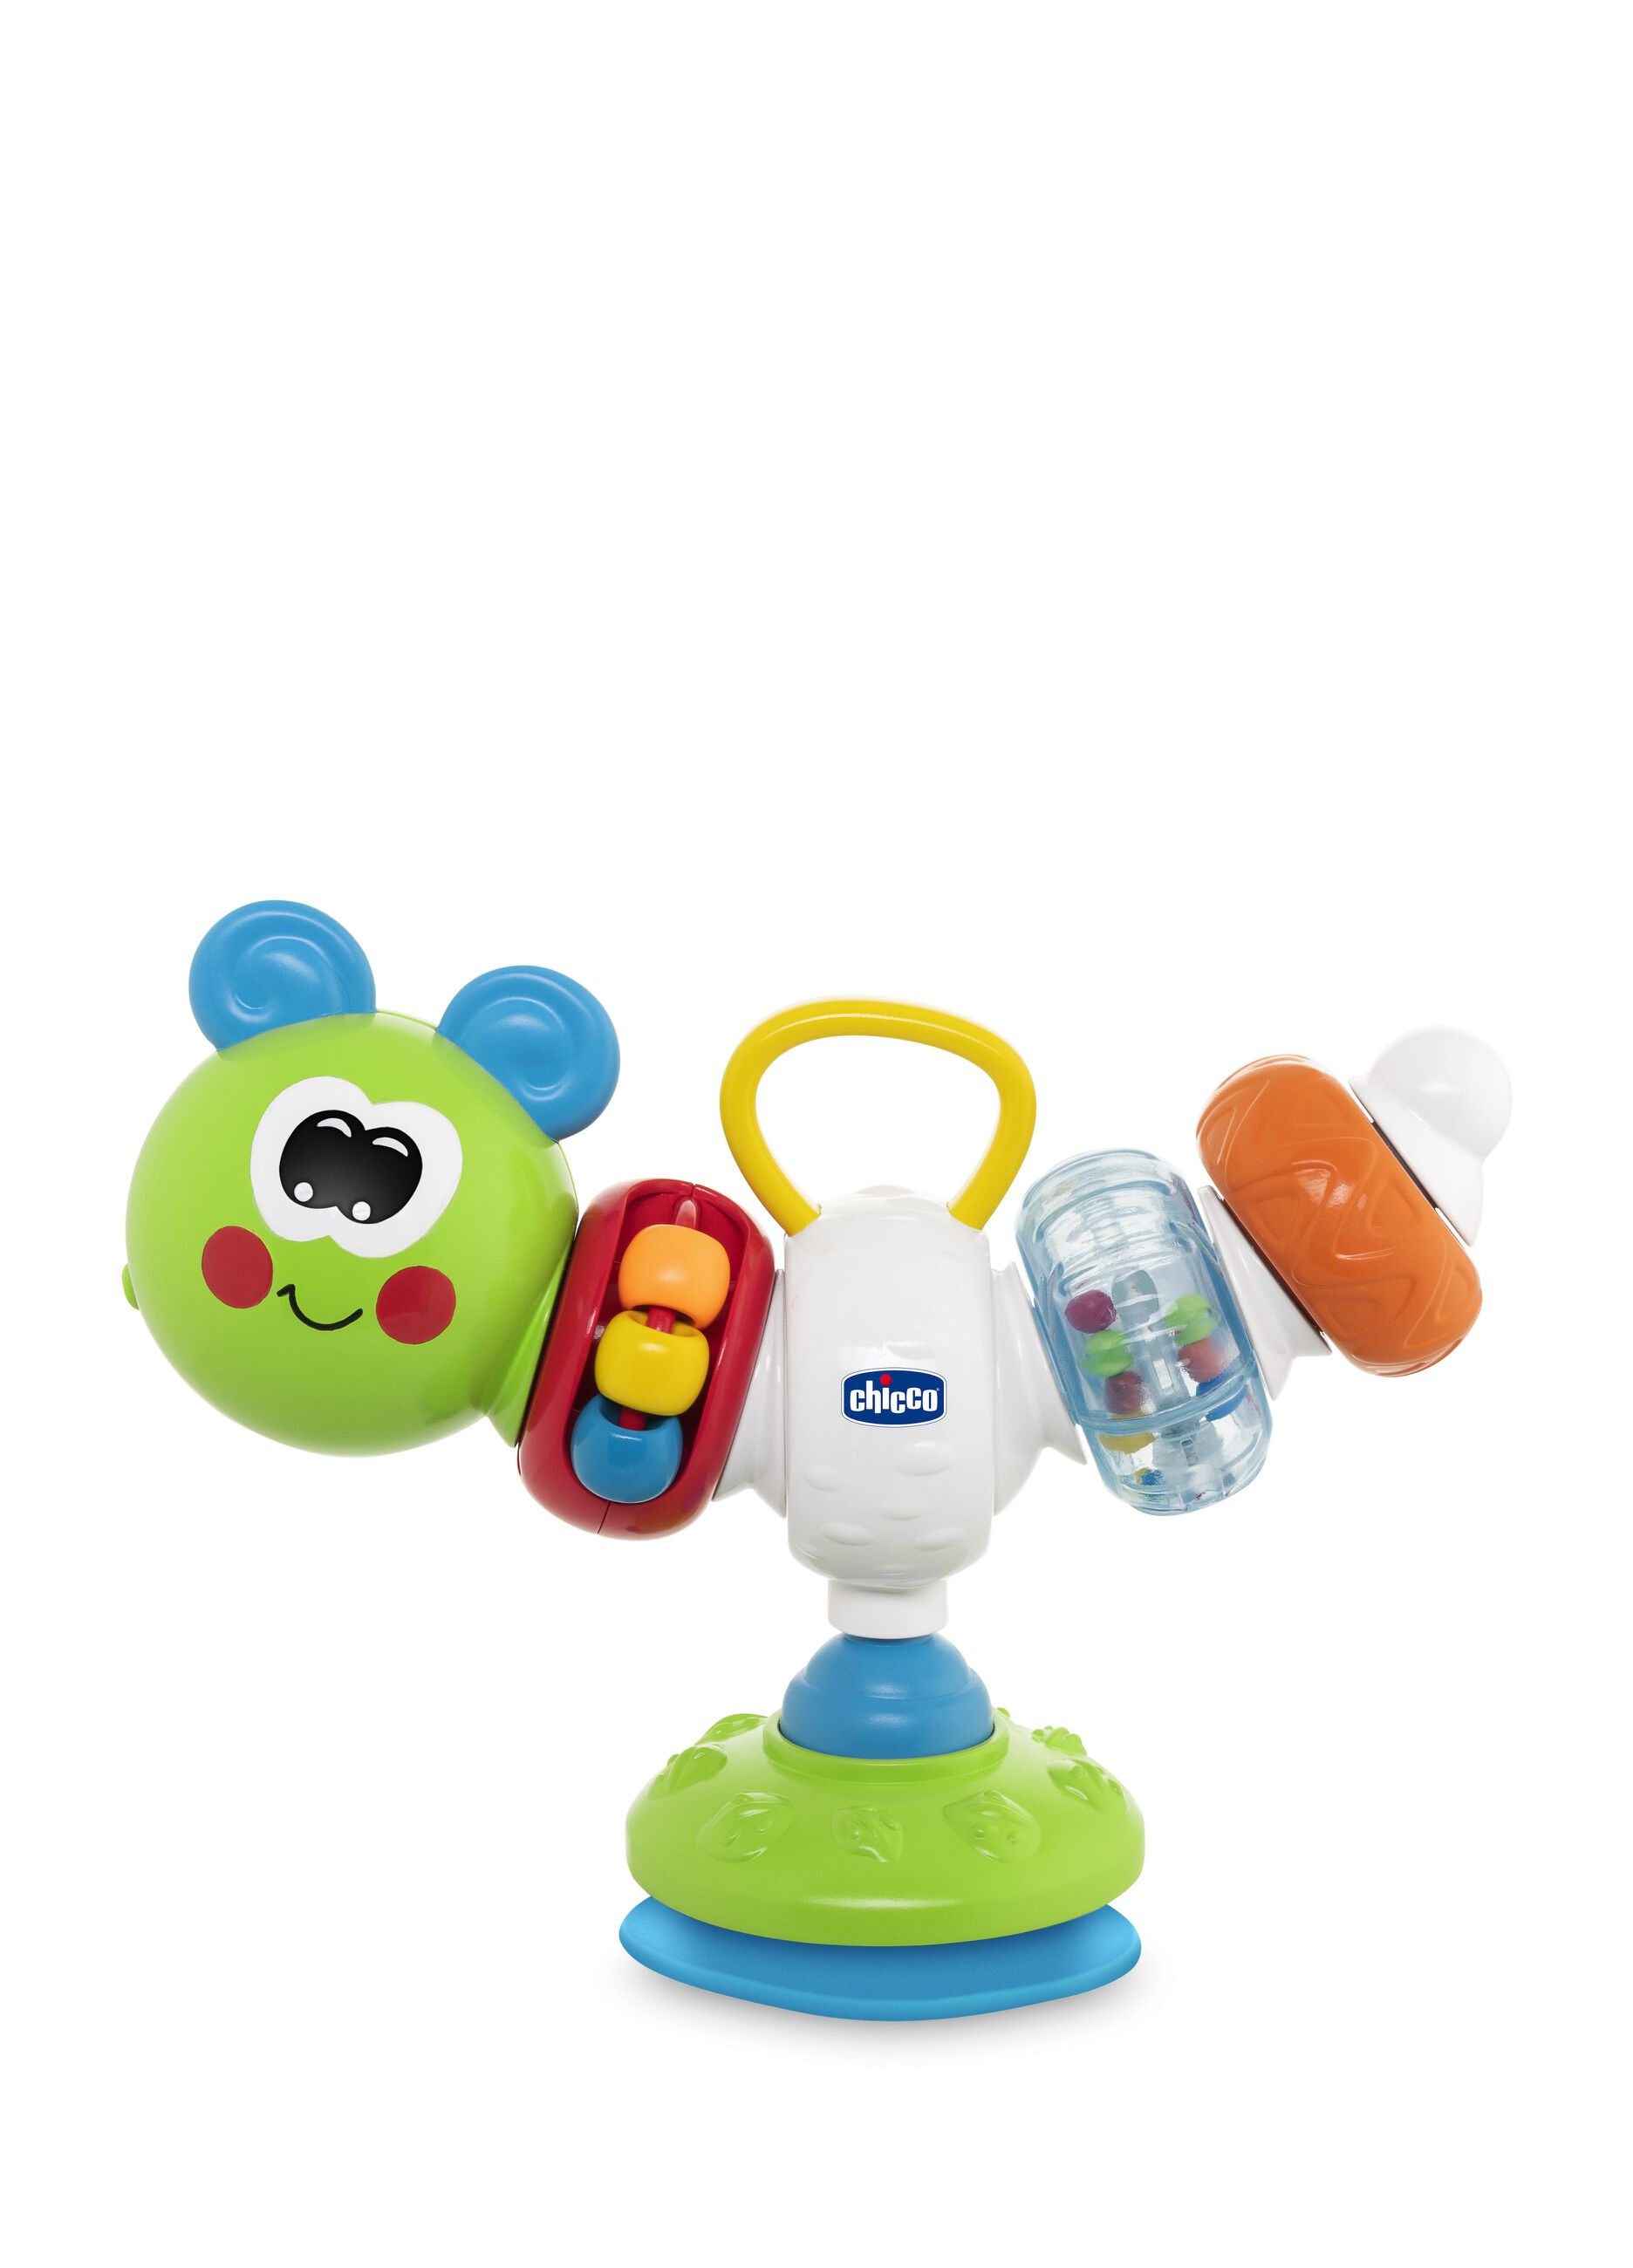 Chicco dancing caterpillar toy